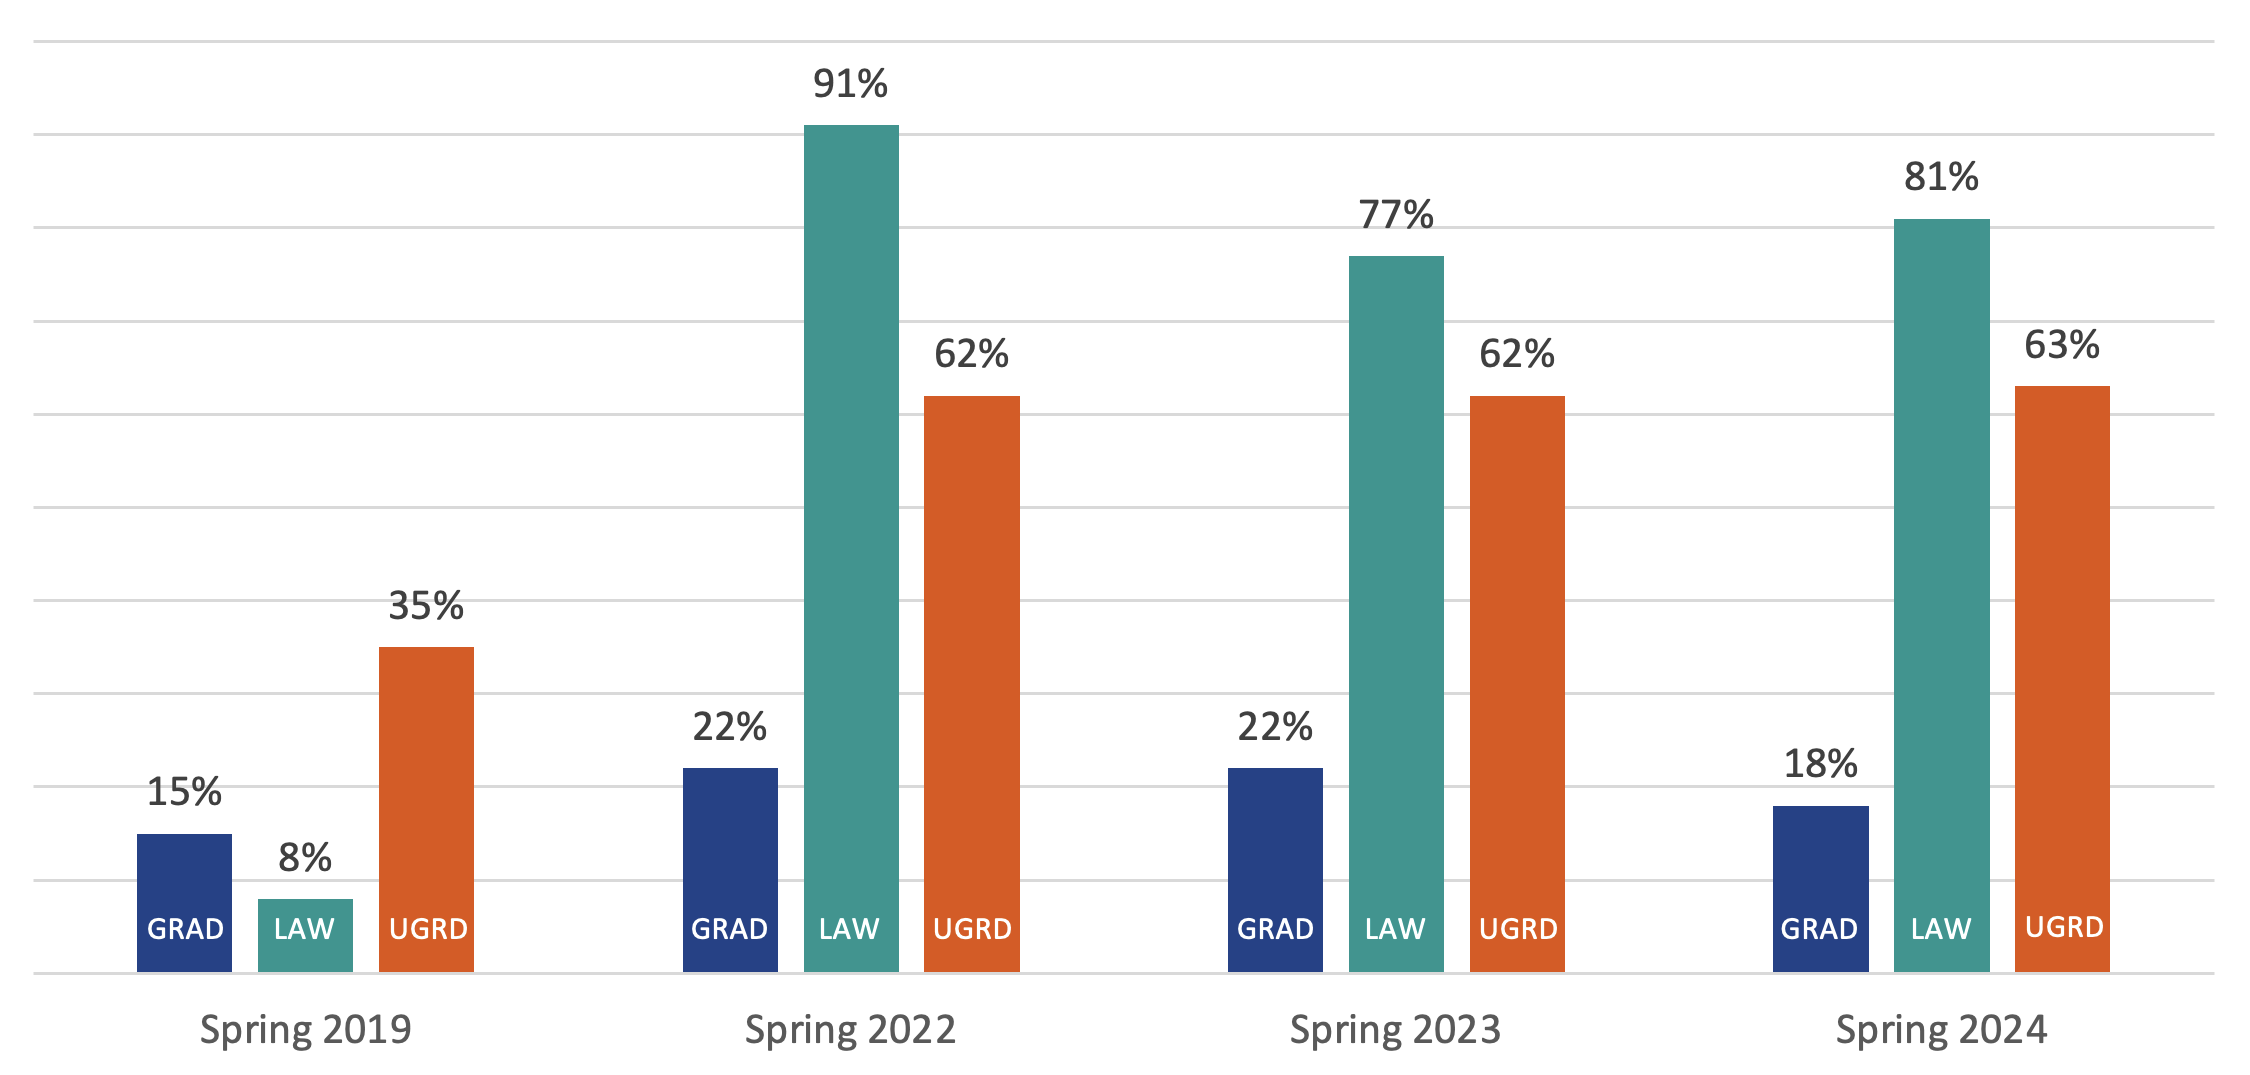 bar chart showing percentage of NIU students taking at least one online course pre-pandemic (spring 2020) vs. past 3 years; Spring 2019: GRAD 15%, LAW 8%, URGD 35%; Spring 2022: GRAD 22%, LAW 91%, UGRD 62%; Spring 2023: GRAD 22%, LAW 77%, UGRD 62%; Spring 2024: GRAD 18%, LAW 81%, UGRD 63%